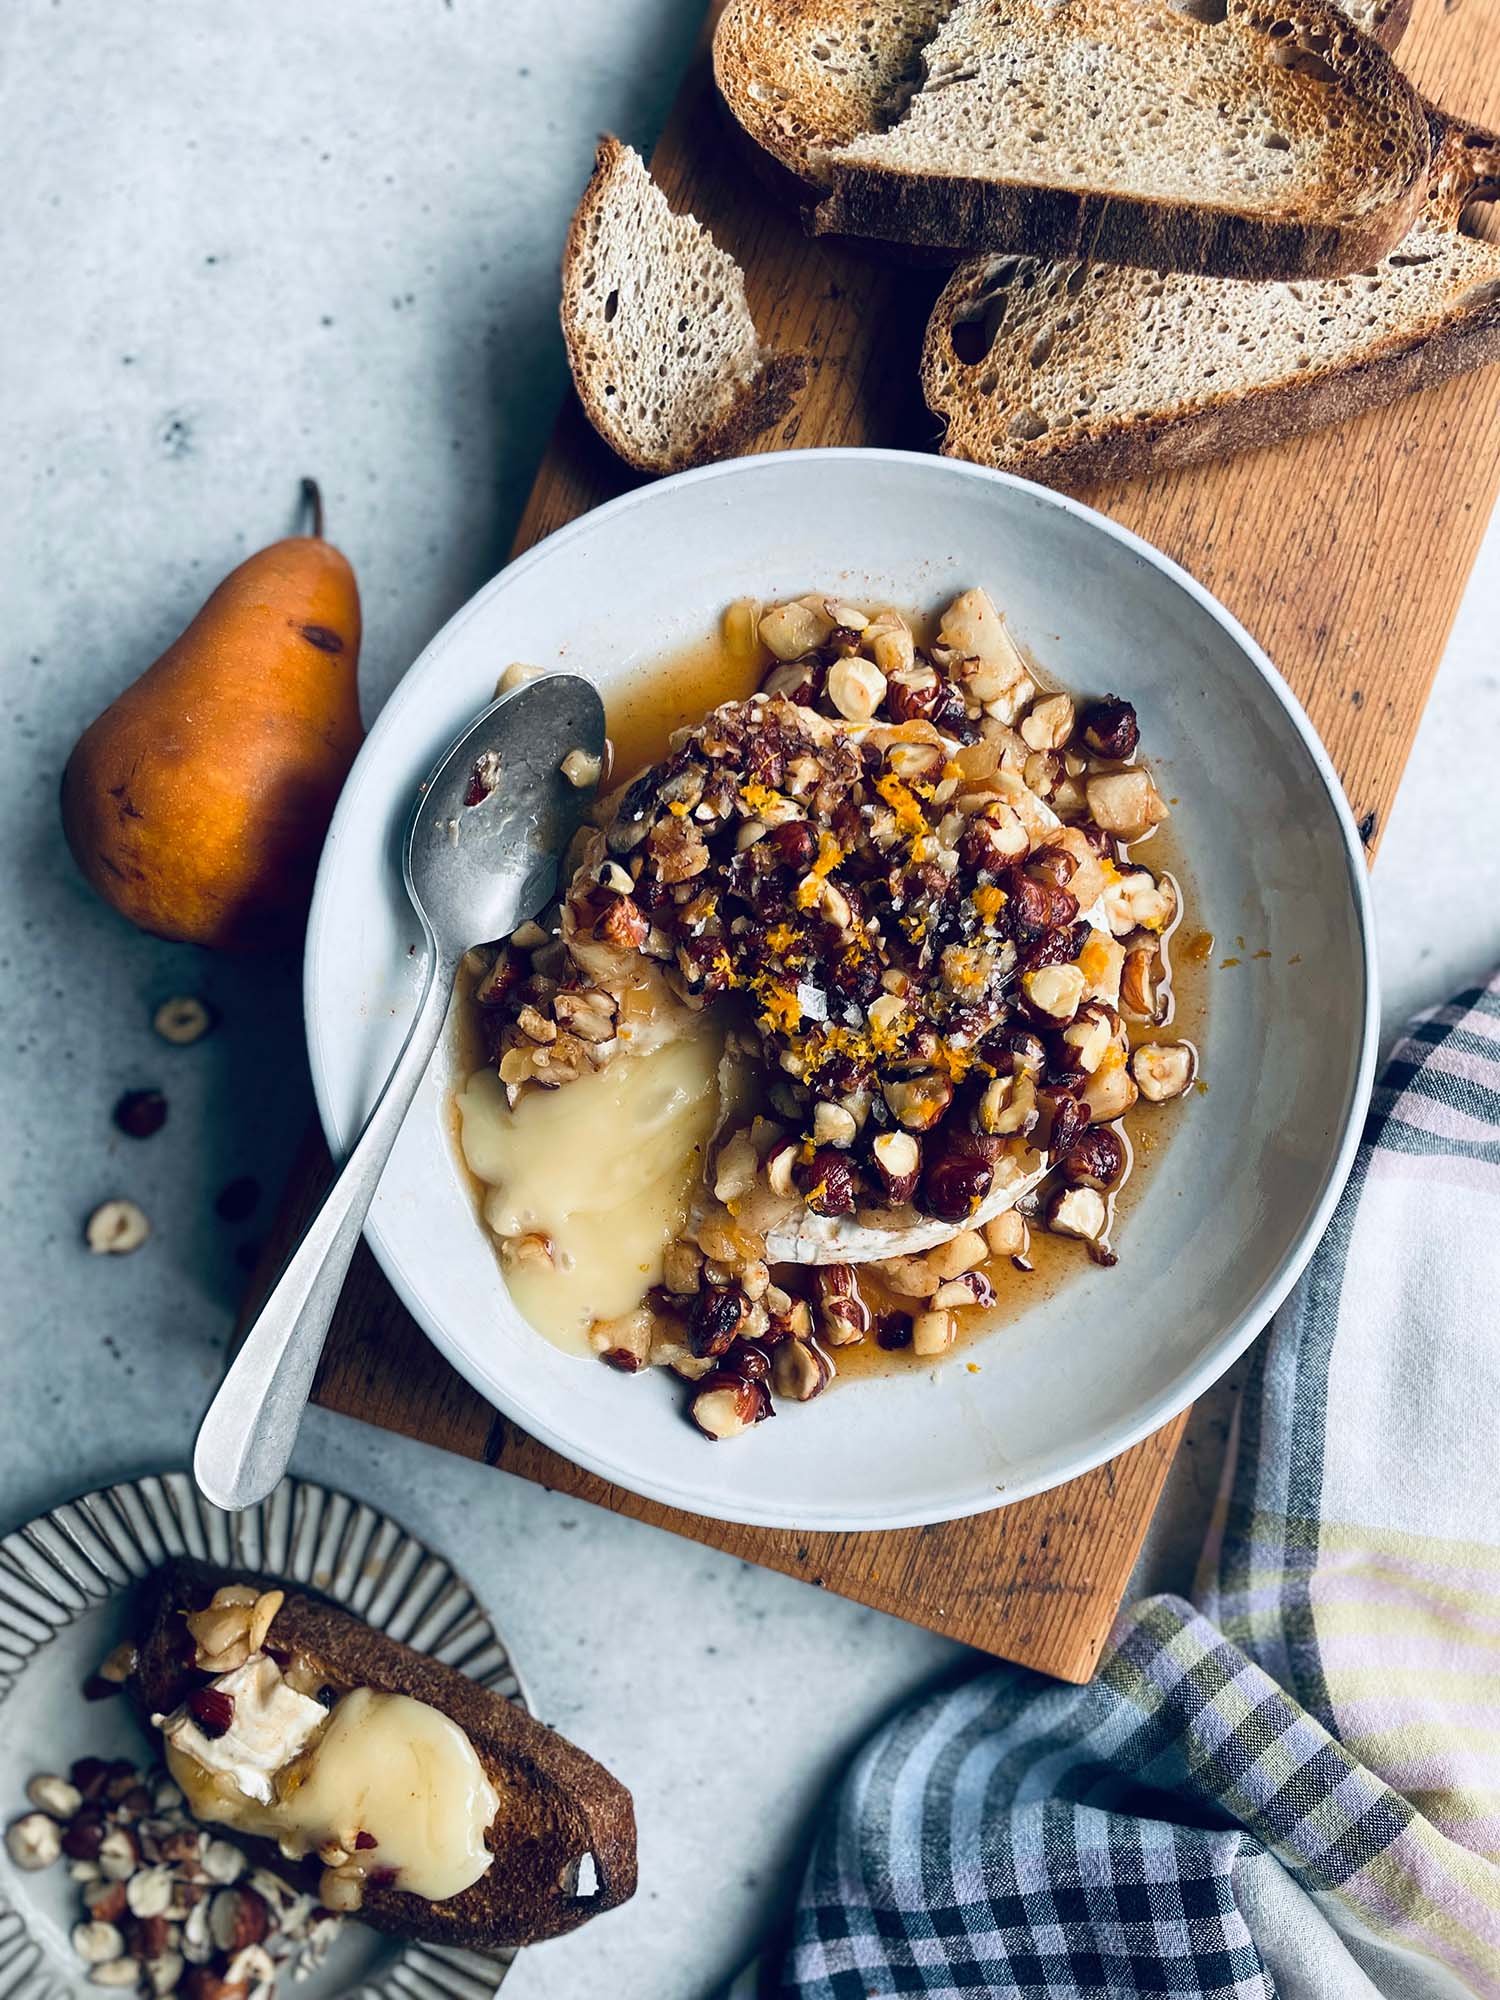 Baked Brie with Pear and Hazelnuts